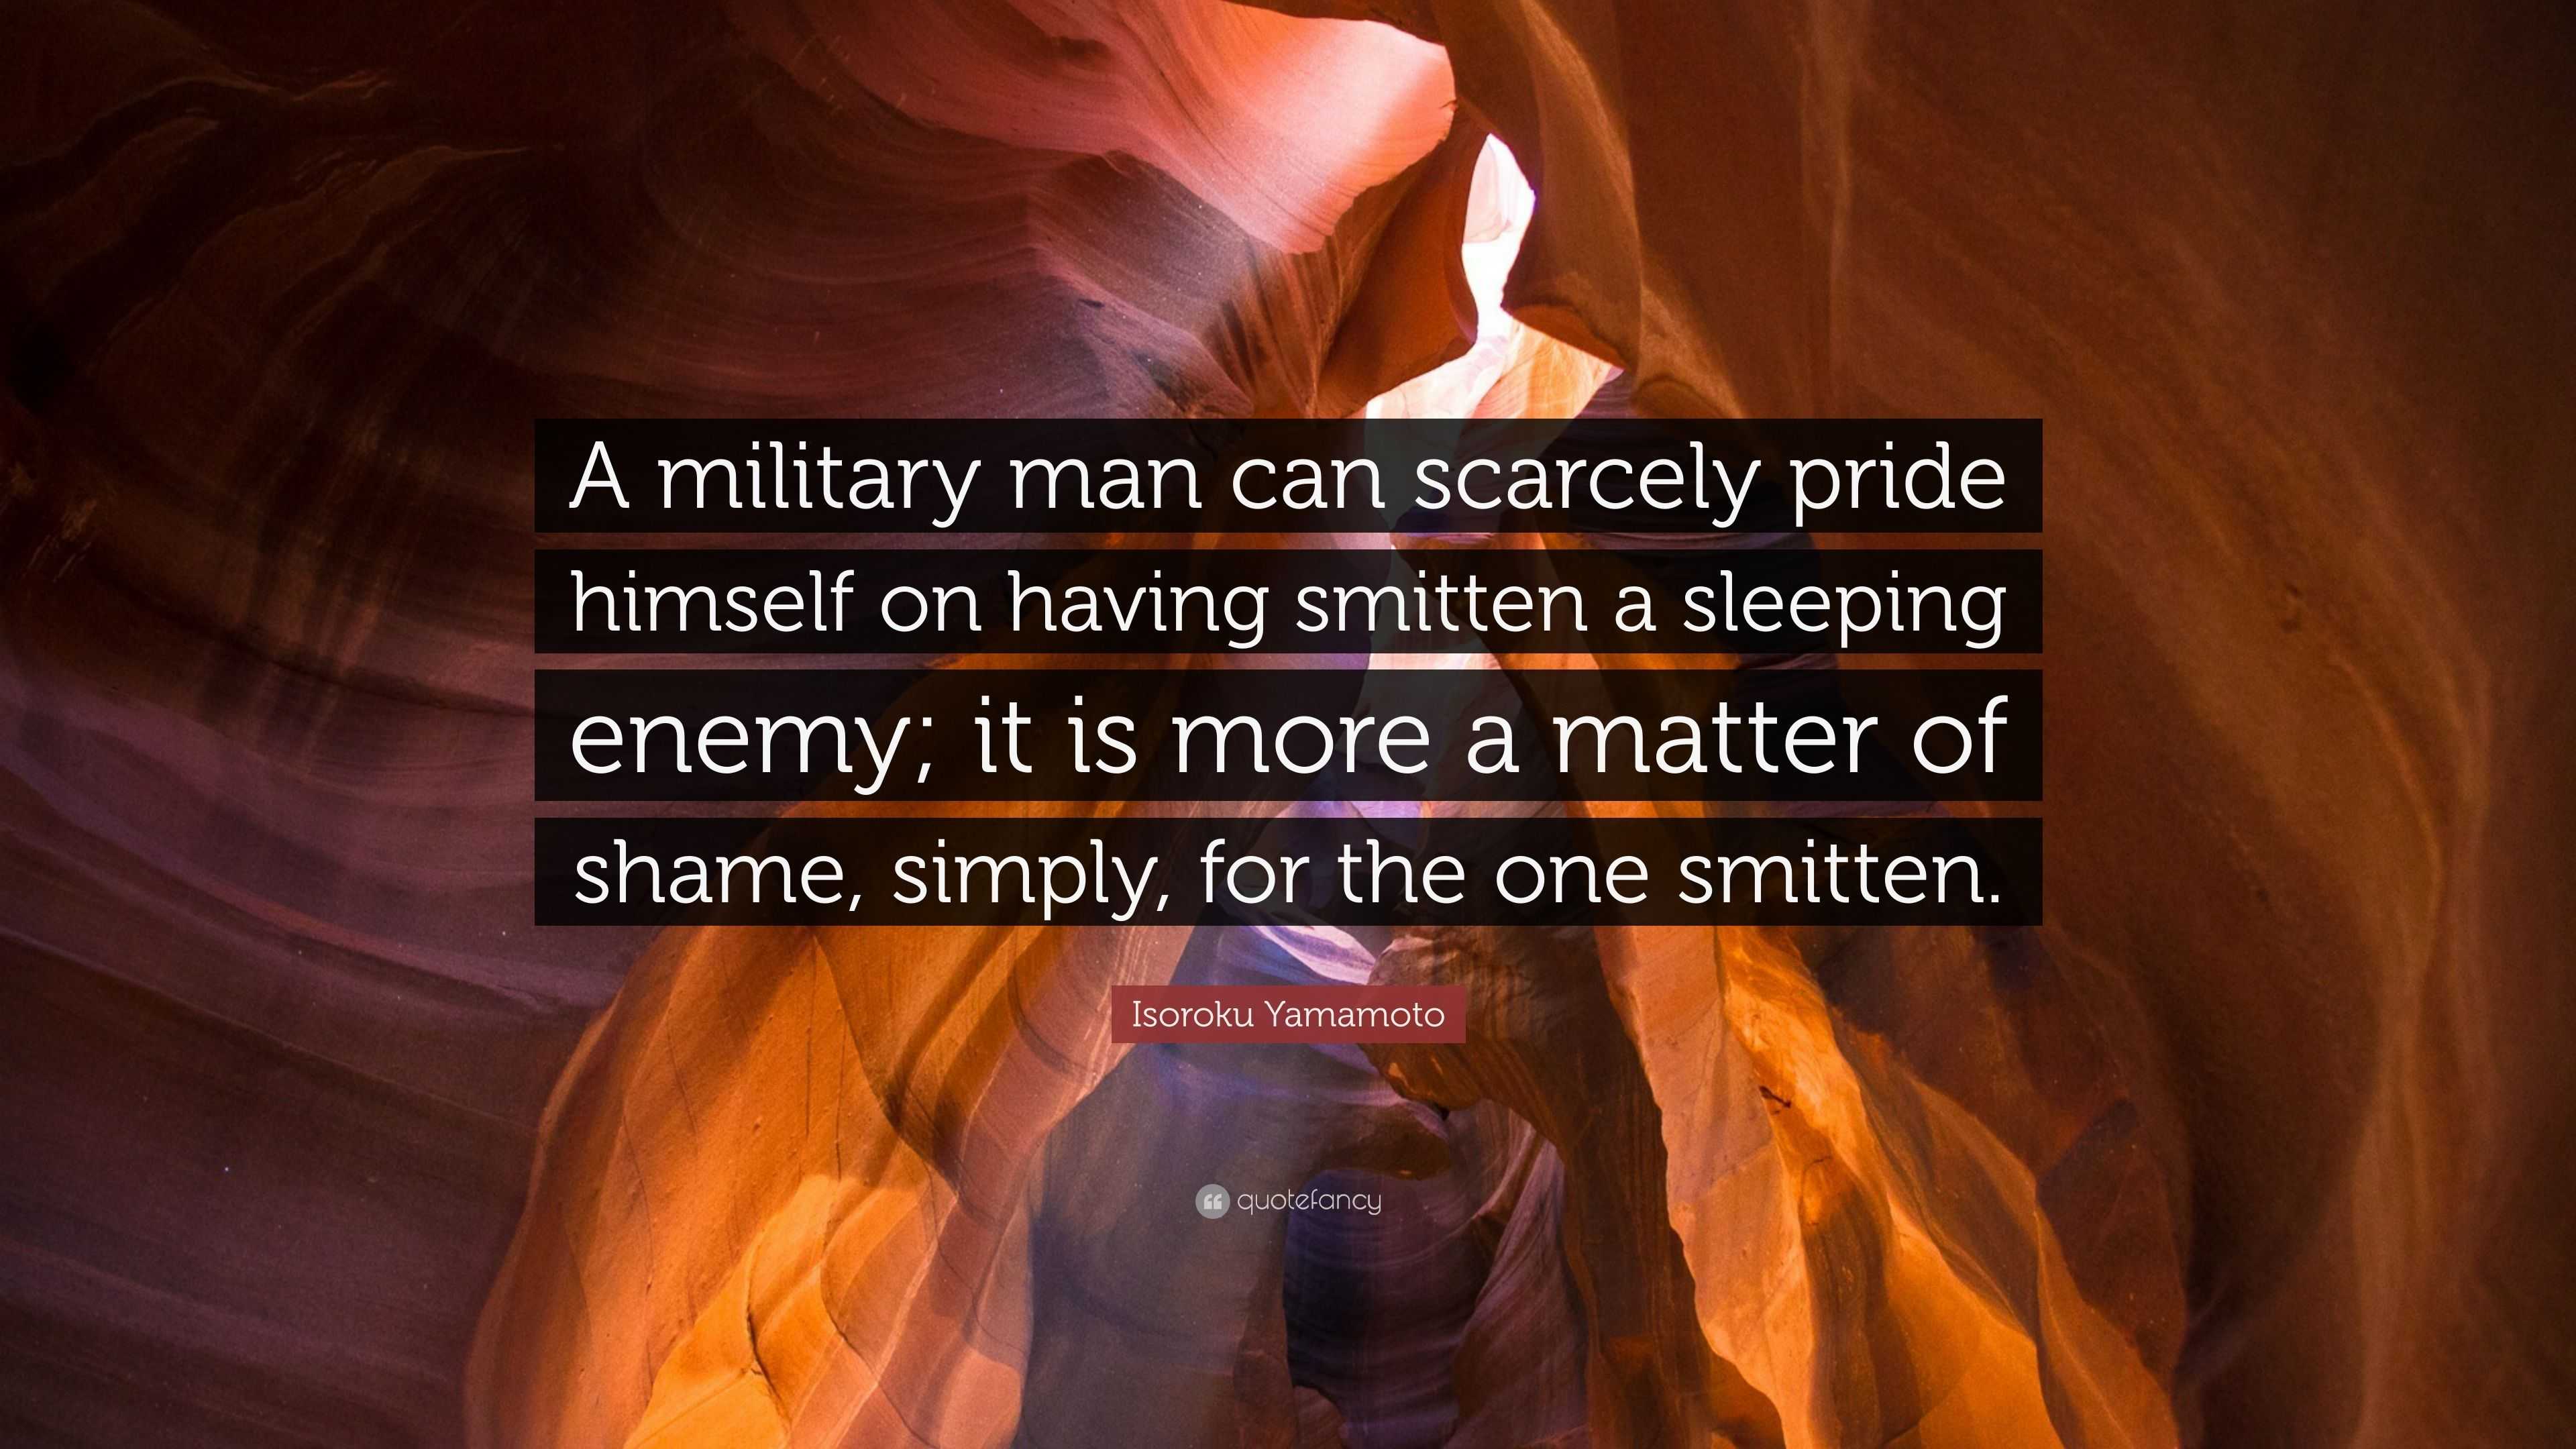 Isoroku Yamamoto Quote: “A military man can scarcely pride himself on ...